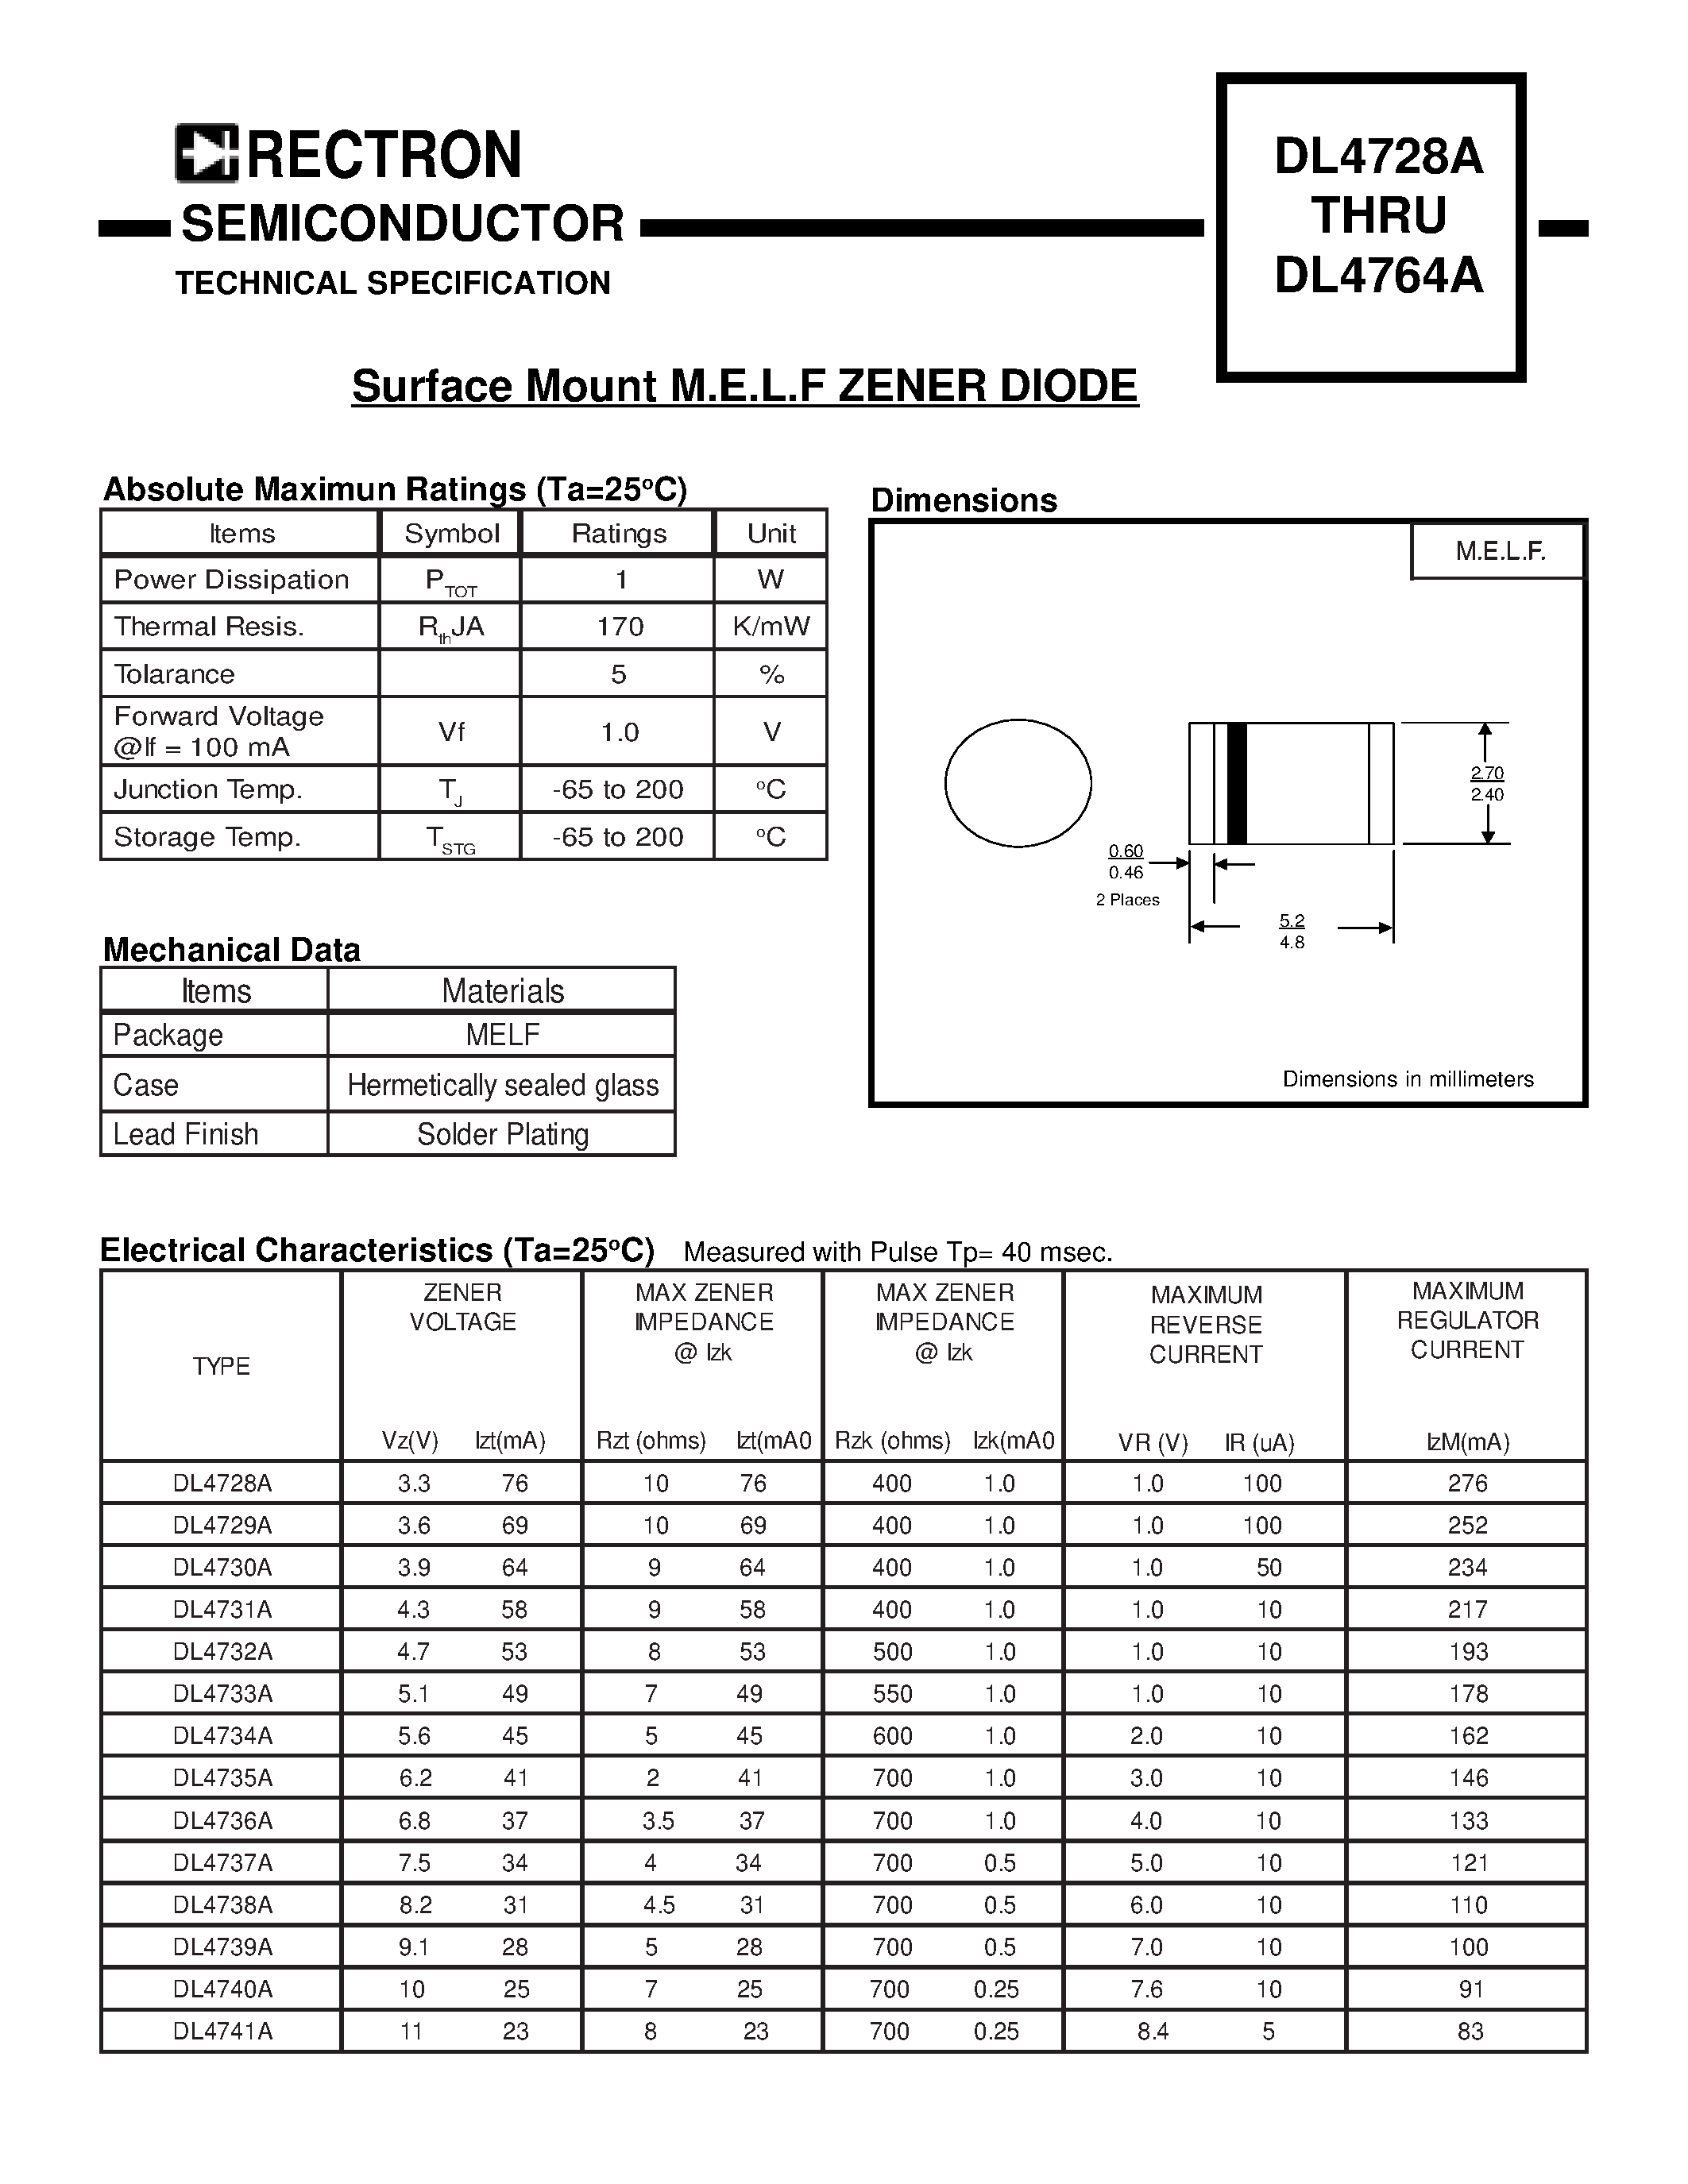 Datasheet DL4752A - Surface Mount M.E.L.F ZENER DIODE page 1